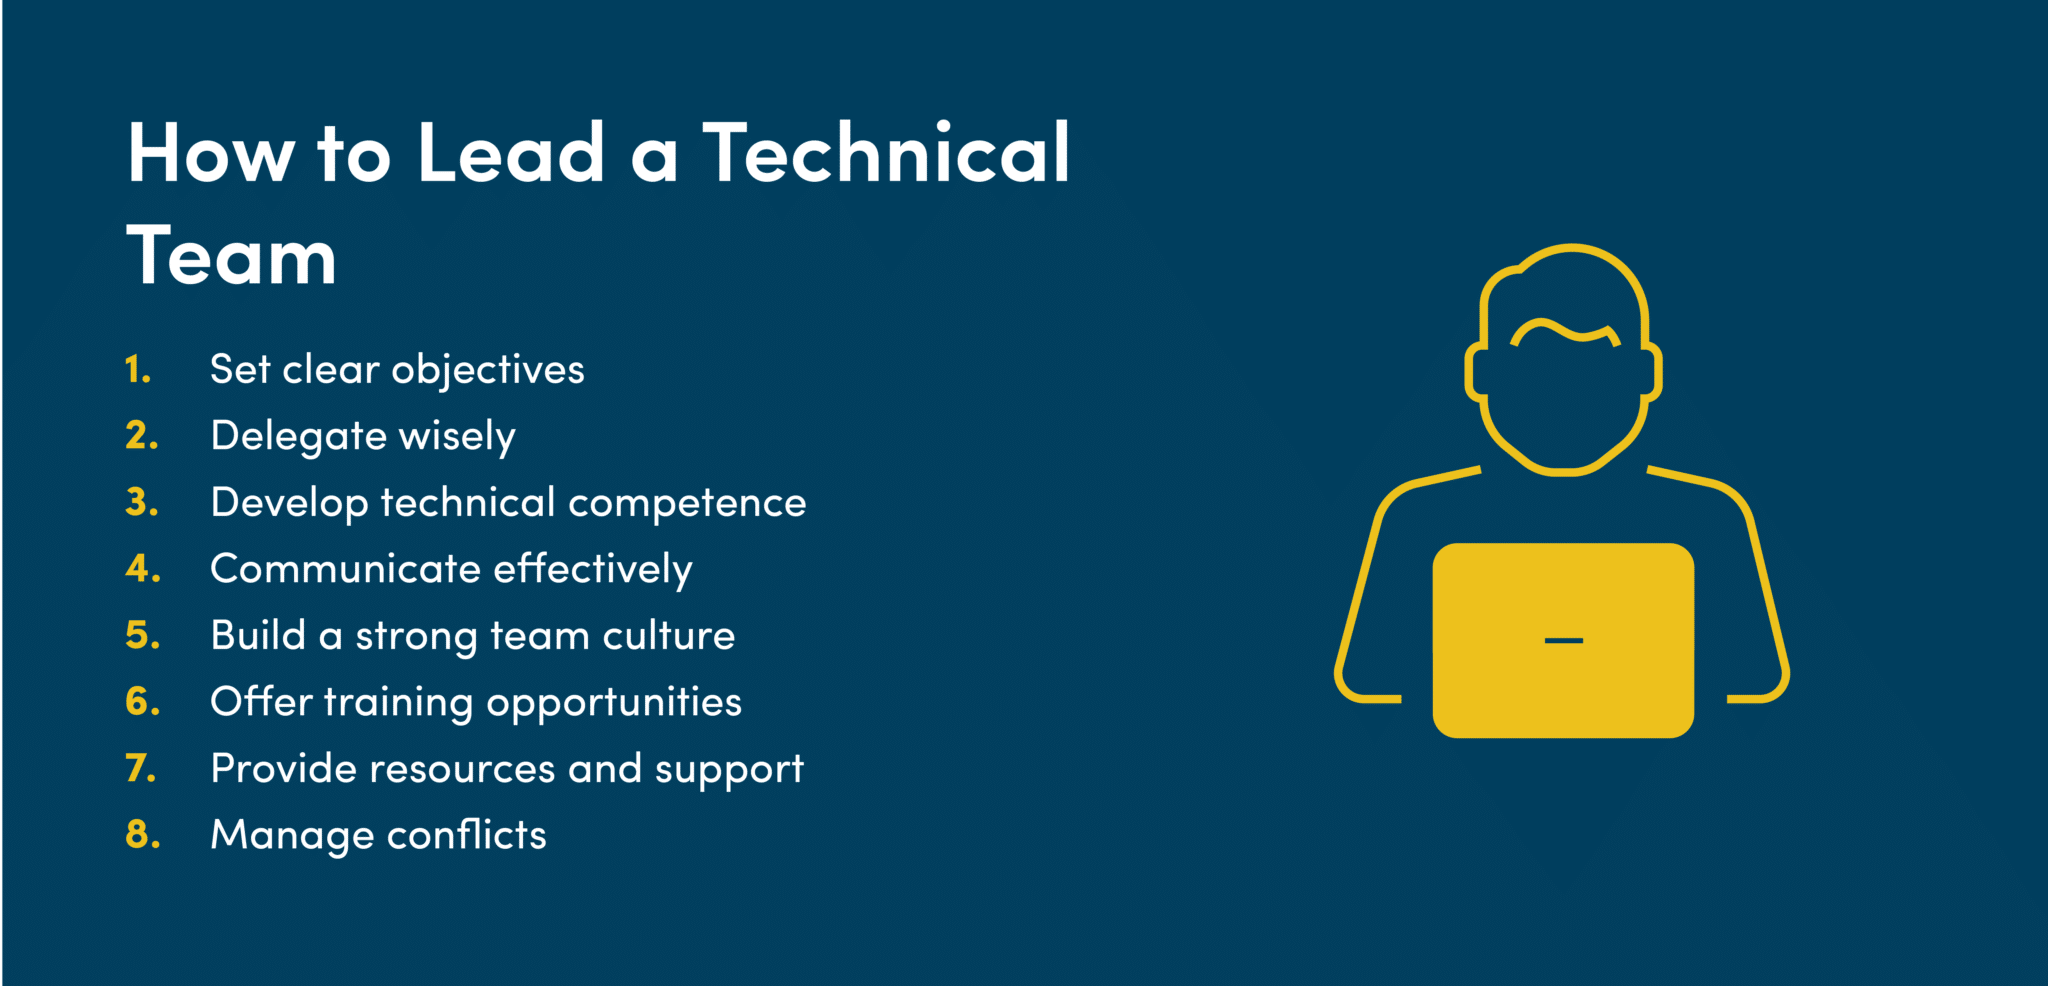 How to lead a technical team